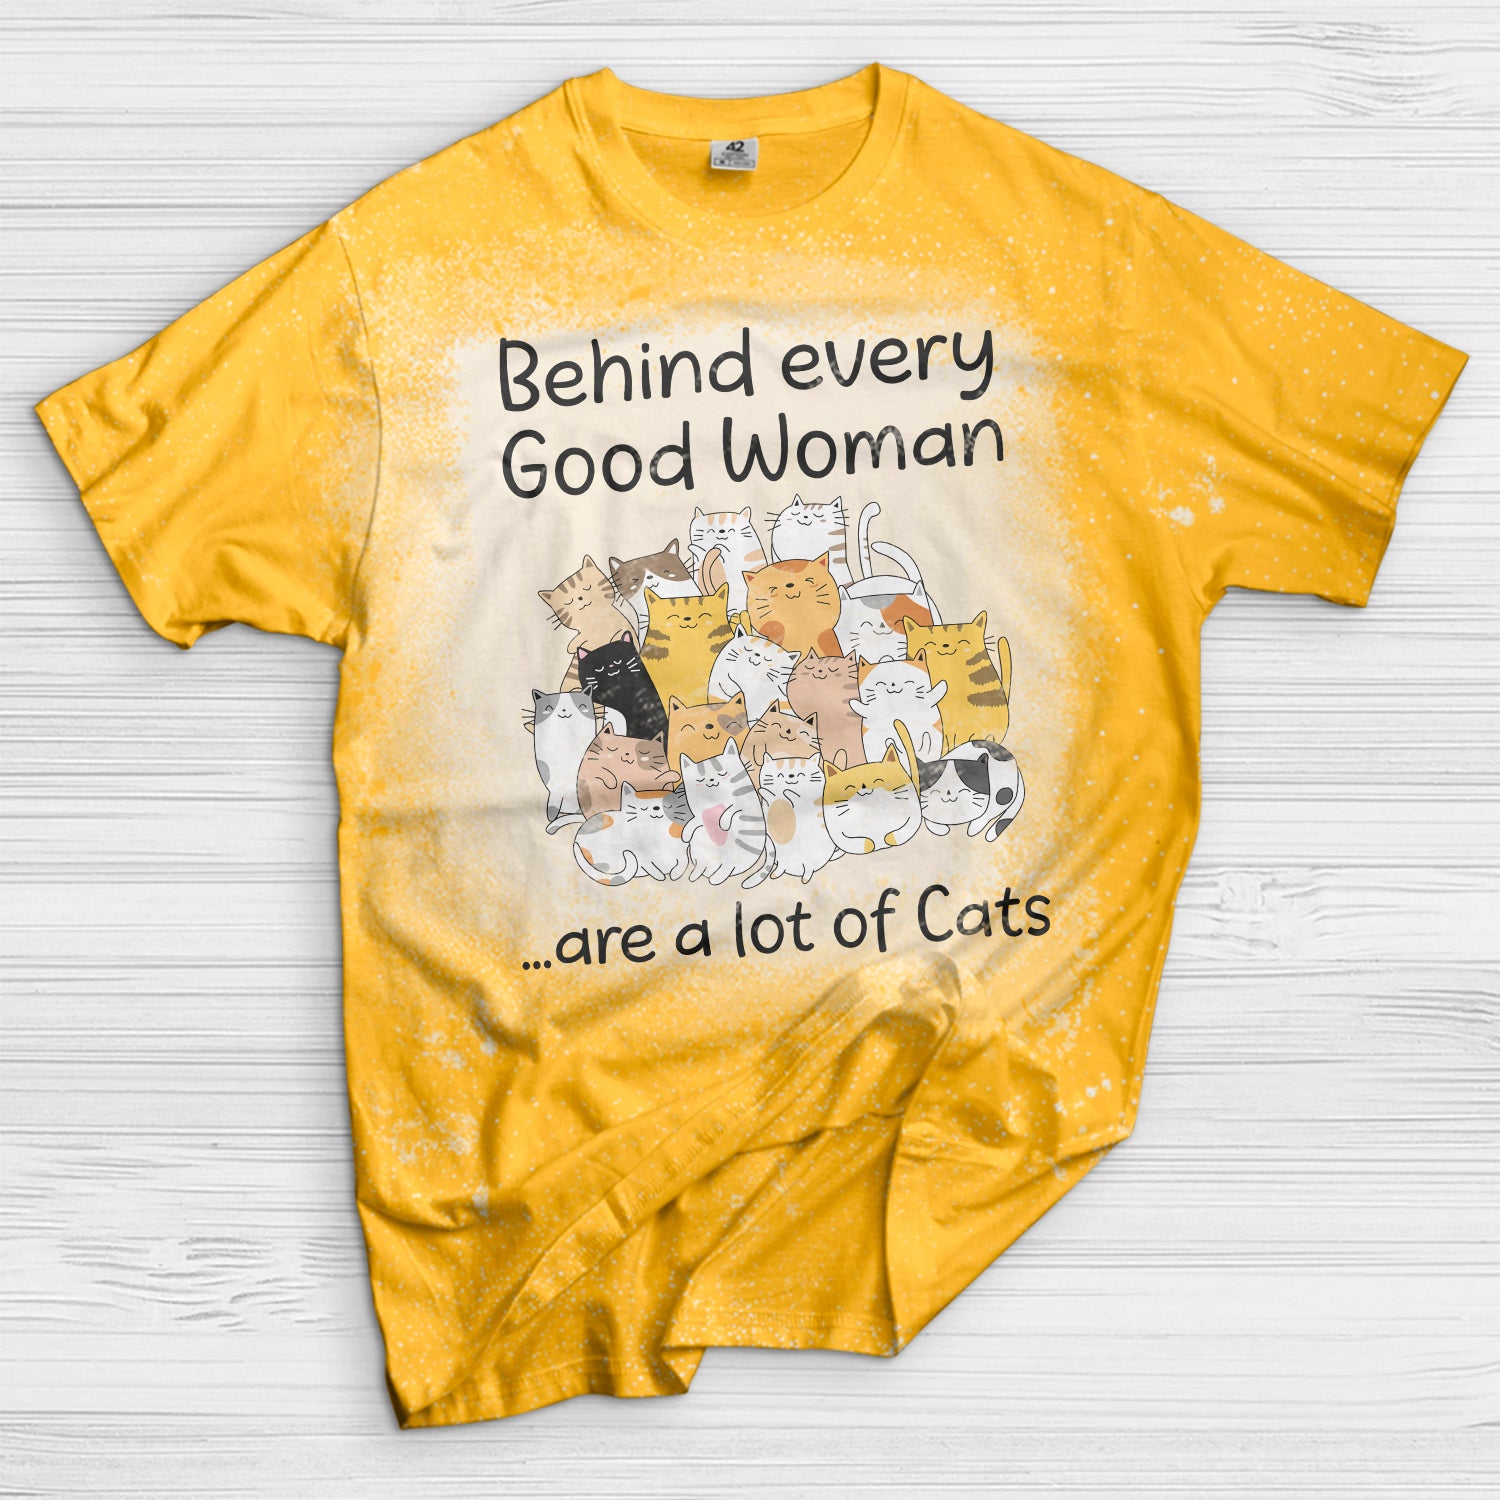 Behind every good woman are a lot of cats Bleached T-Shirt